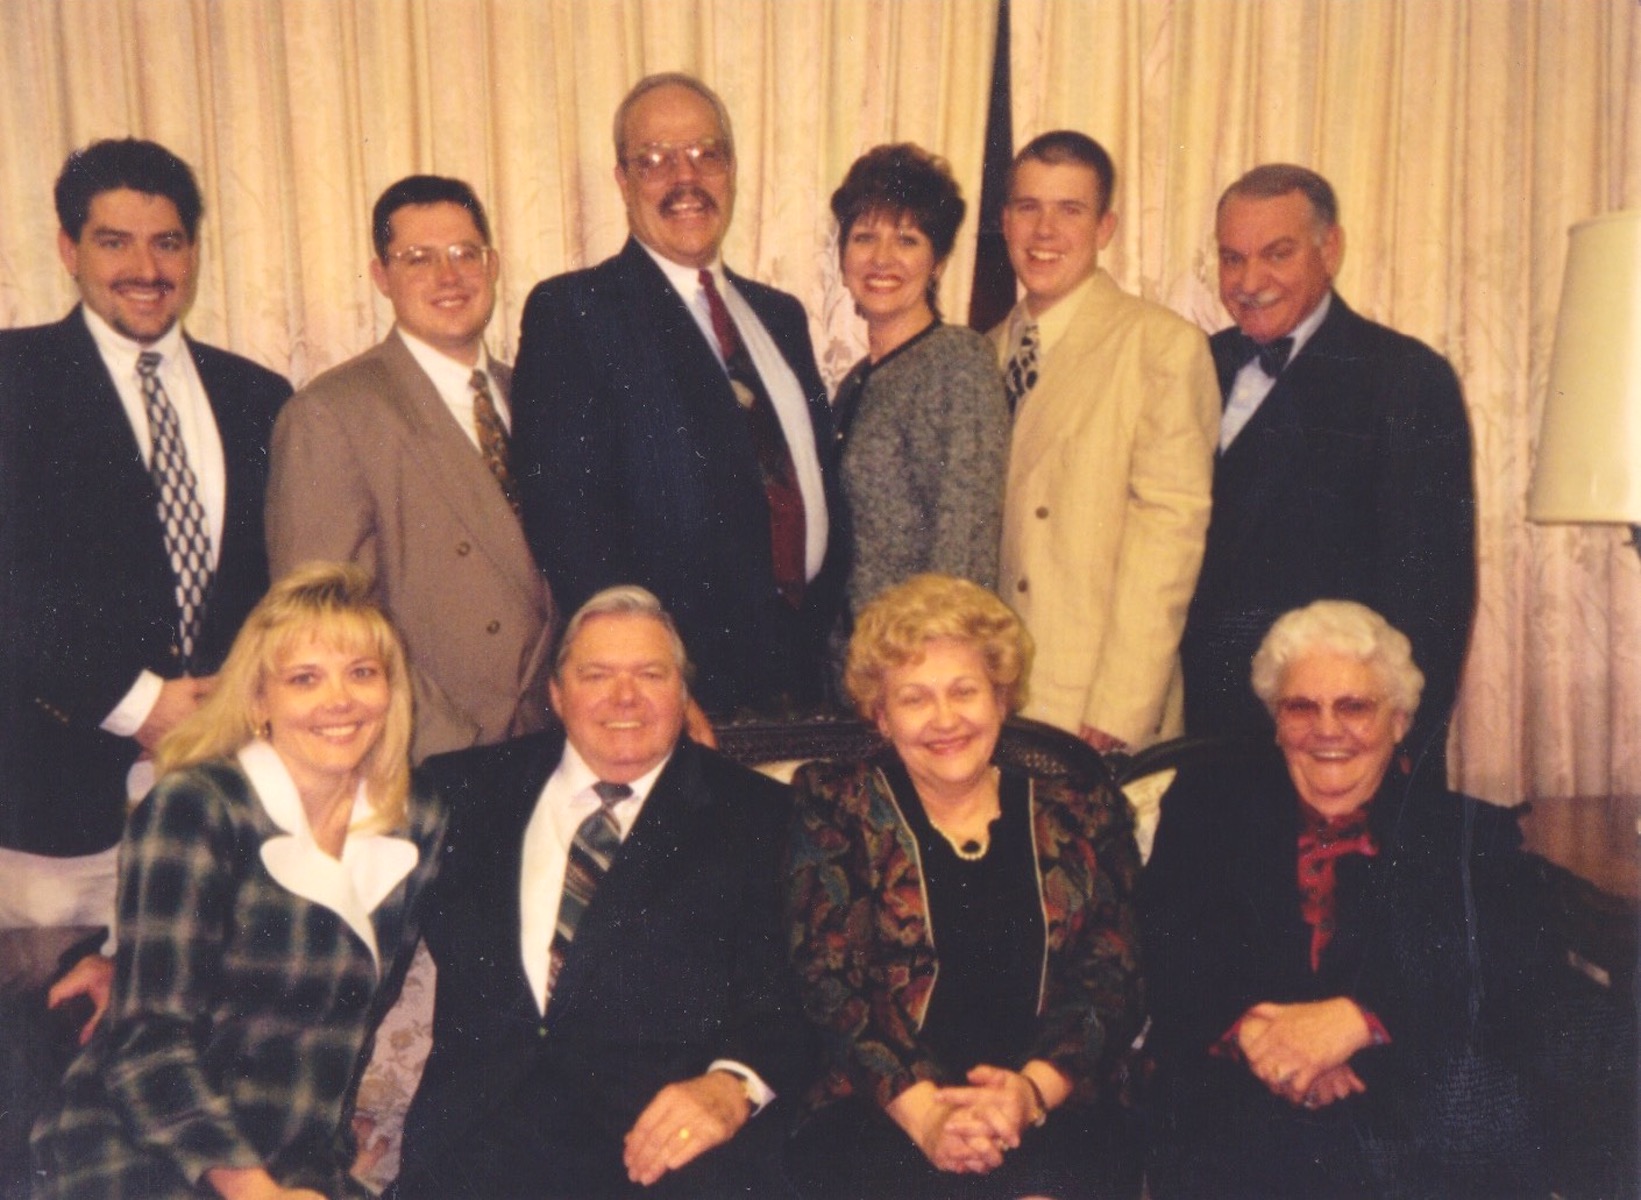 K.C. Potter’s immediate family, 1990. (Front L-R) niece Jeanie Swant, brother-in-law Gene Davis, sister Ann Davis, mother Amanda Potter. (Back L-R) nephews Paul Walter Davis and Gene Davis, nephew-in-law James Stambaugh and niece/wife Debbie Johnson, grand nephew Jeff Wells, and K.C. Potter. Missing: brother Jerry Potter. 